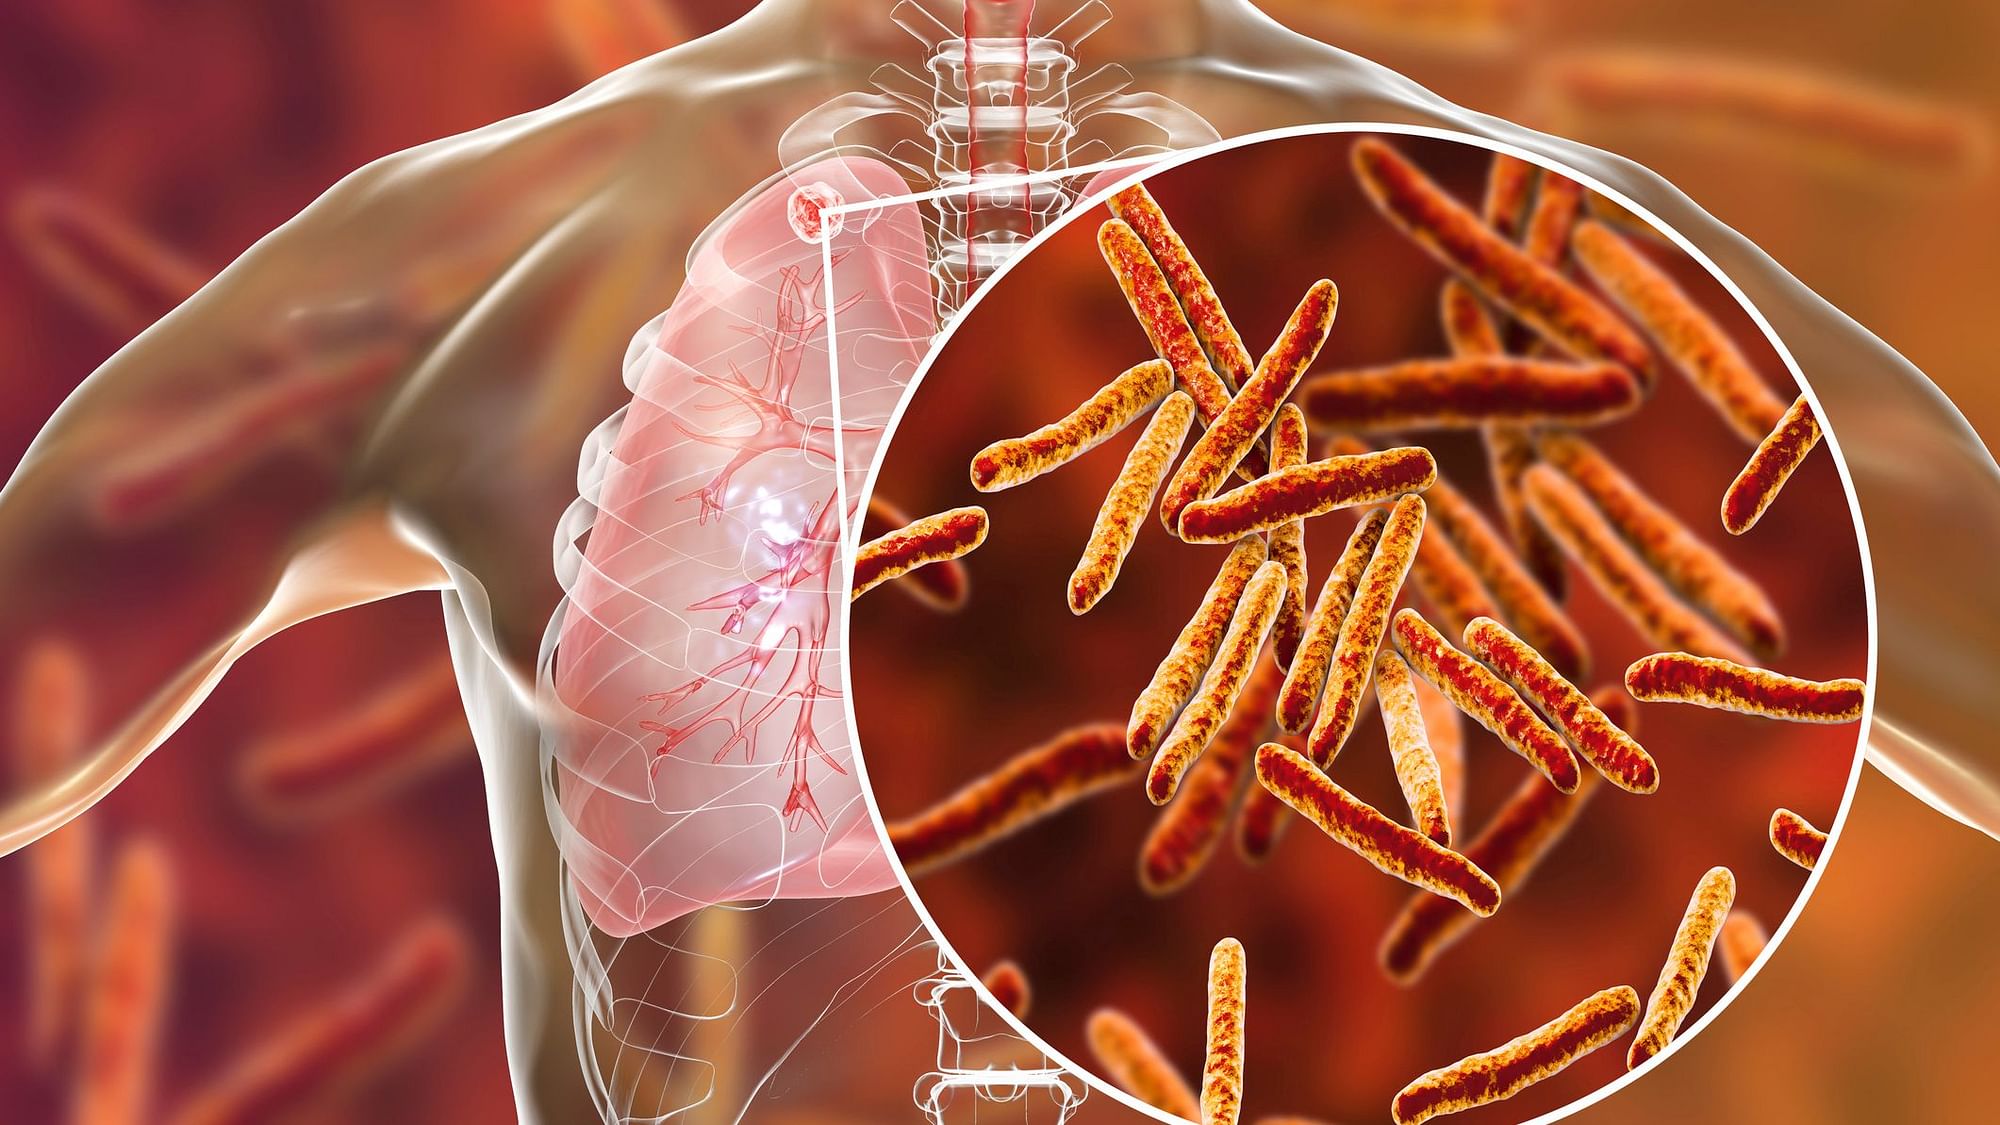 TB not a life-long infection in most people, finds a study.